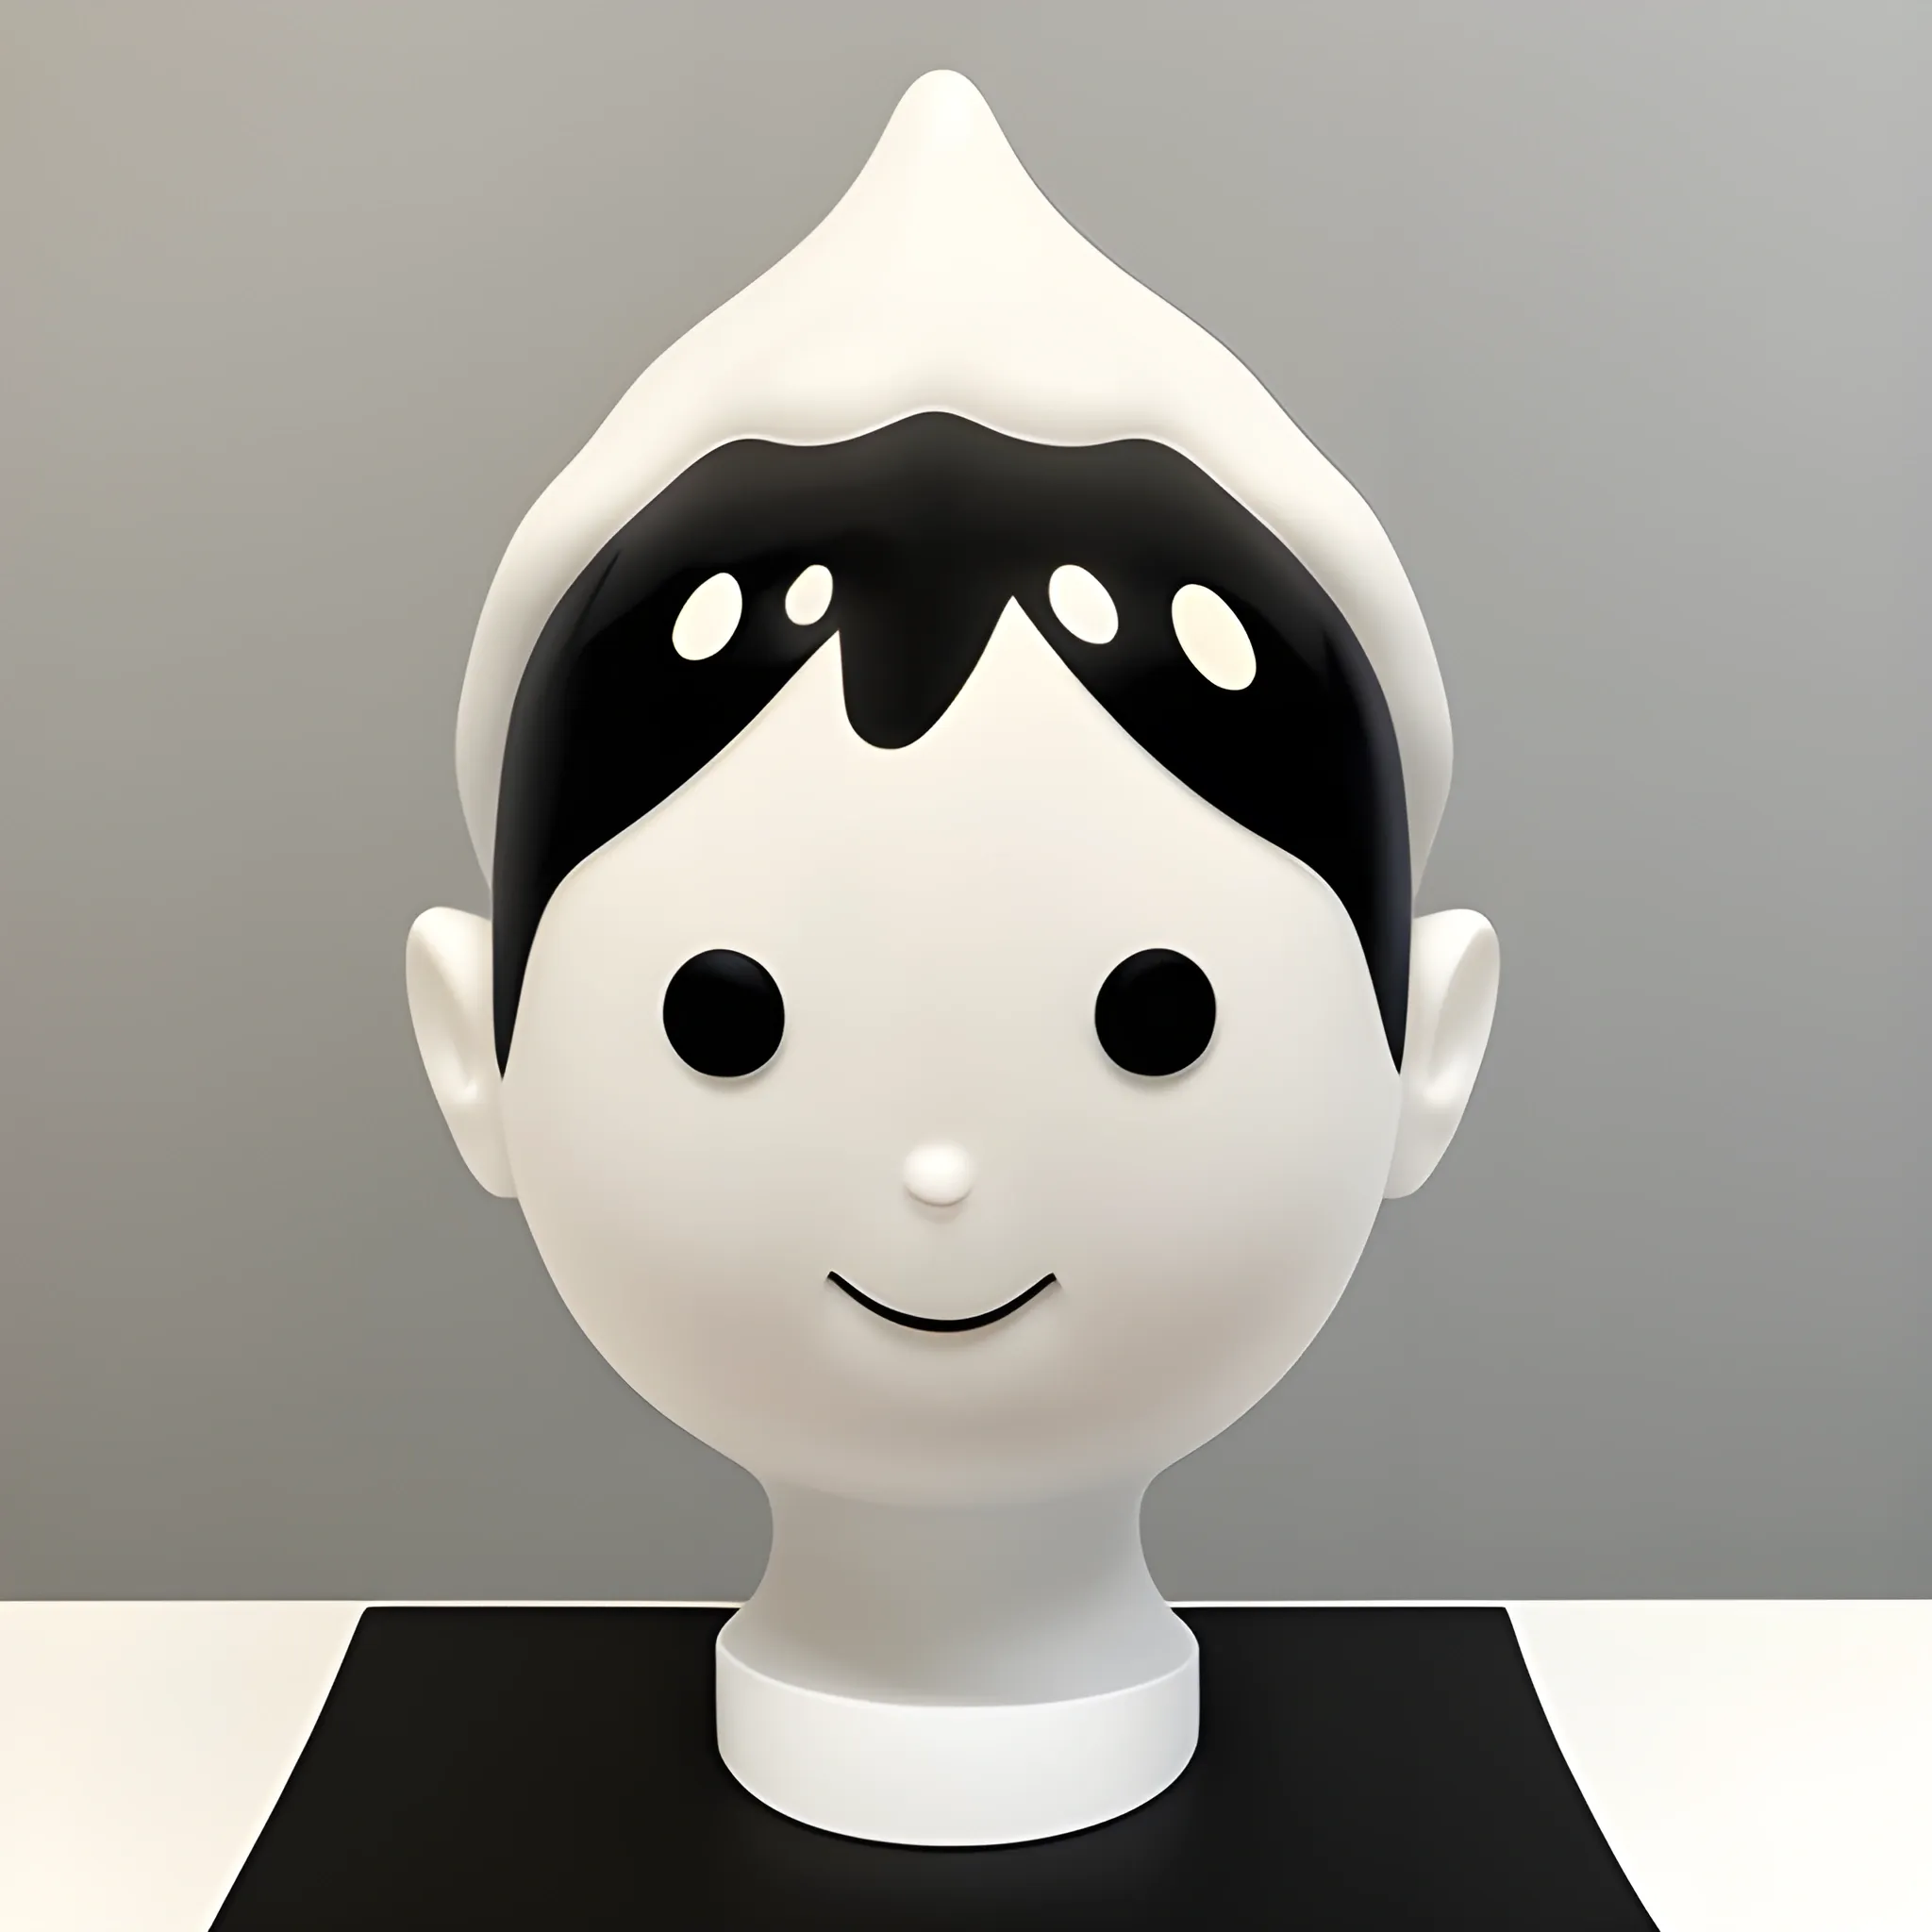 White pulp, abstract water droplet shaped head, resembling an H-shaped body, with a trendy overall style. The entire head to body ratio is a 1:1 or 1:2 Q-version image, with a large head and simple eyes on the face. The personality is lively and cute, Cartoon